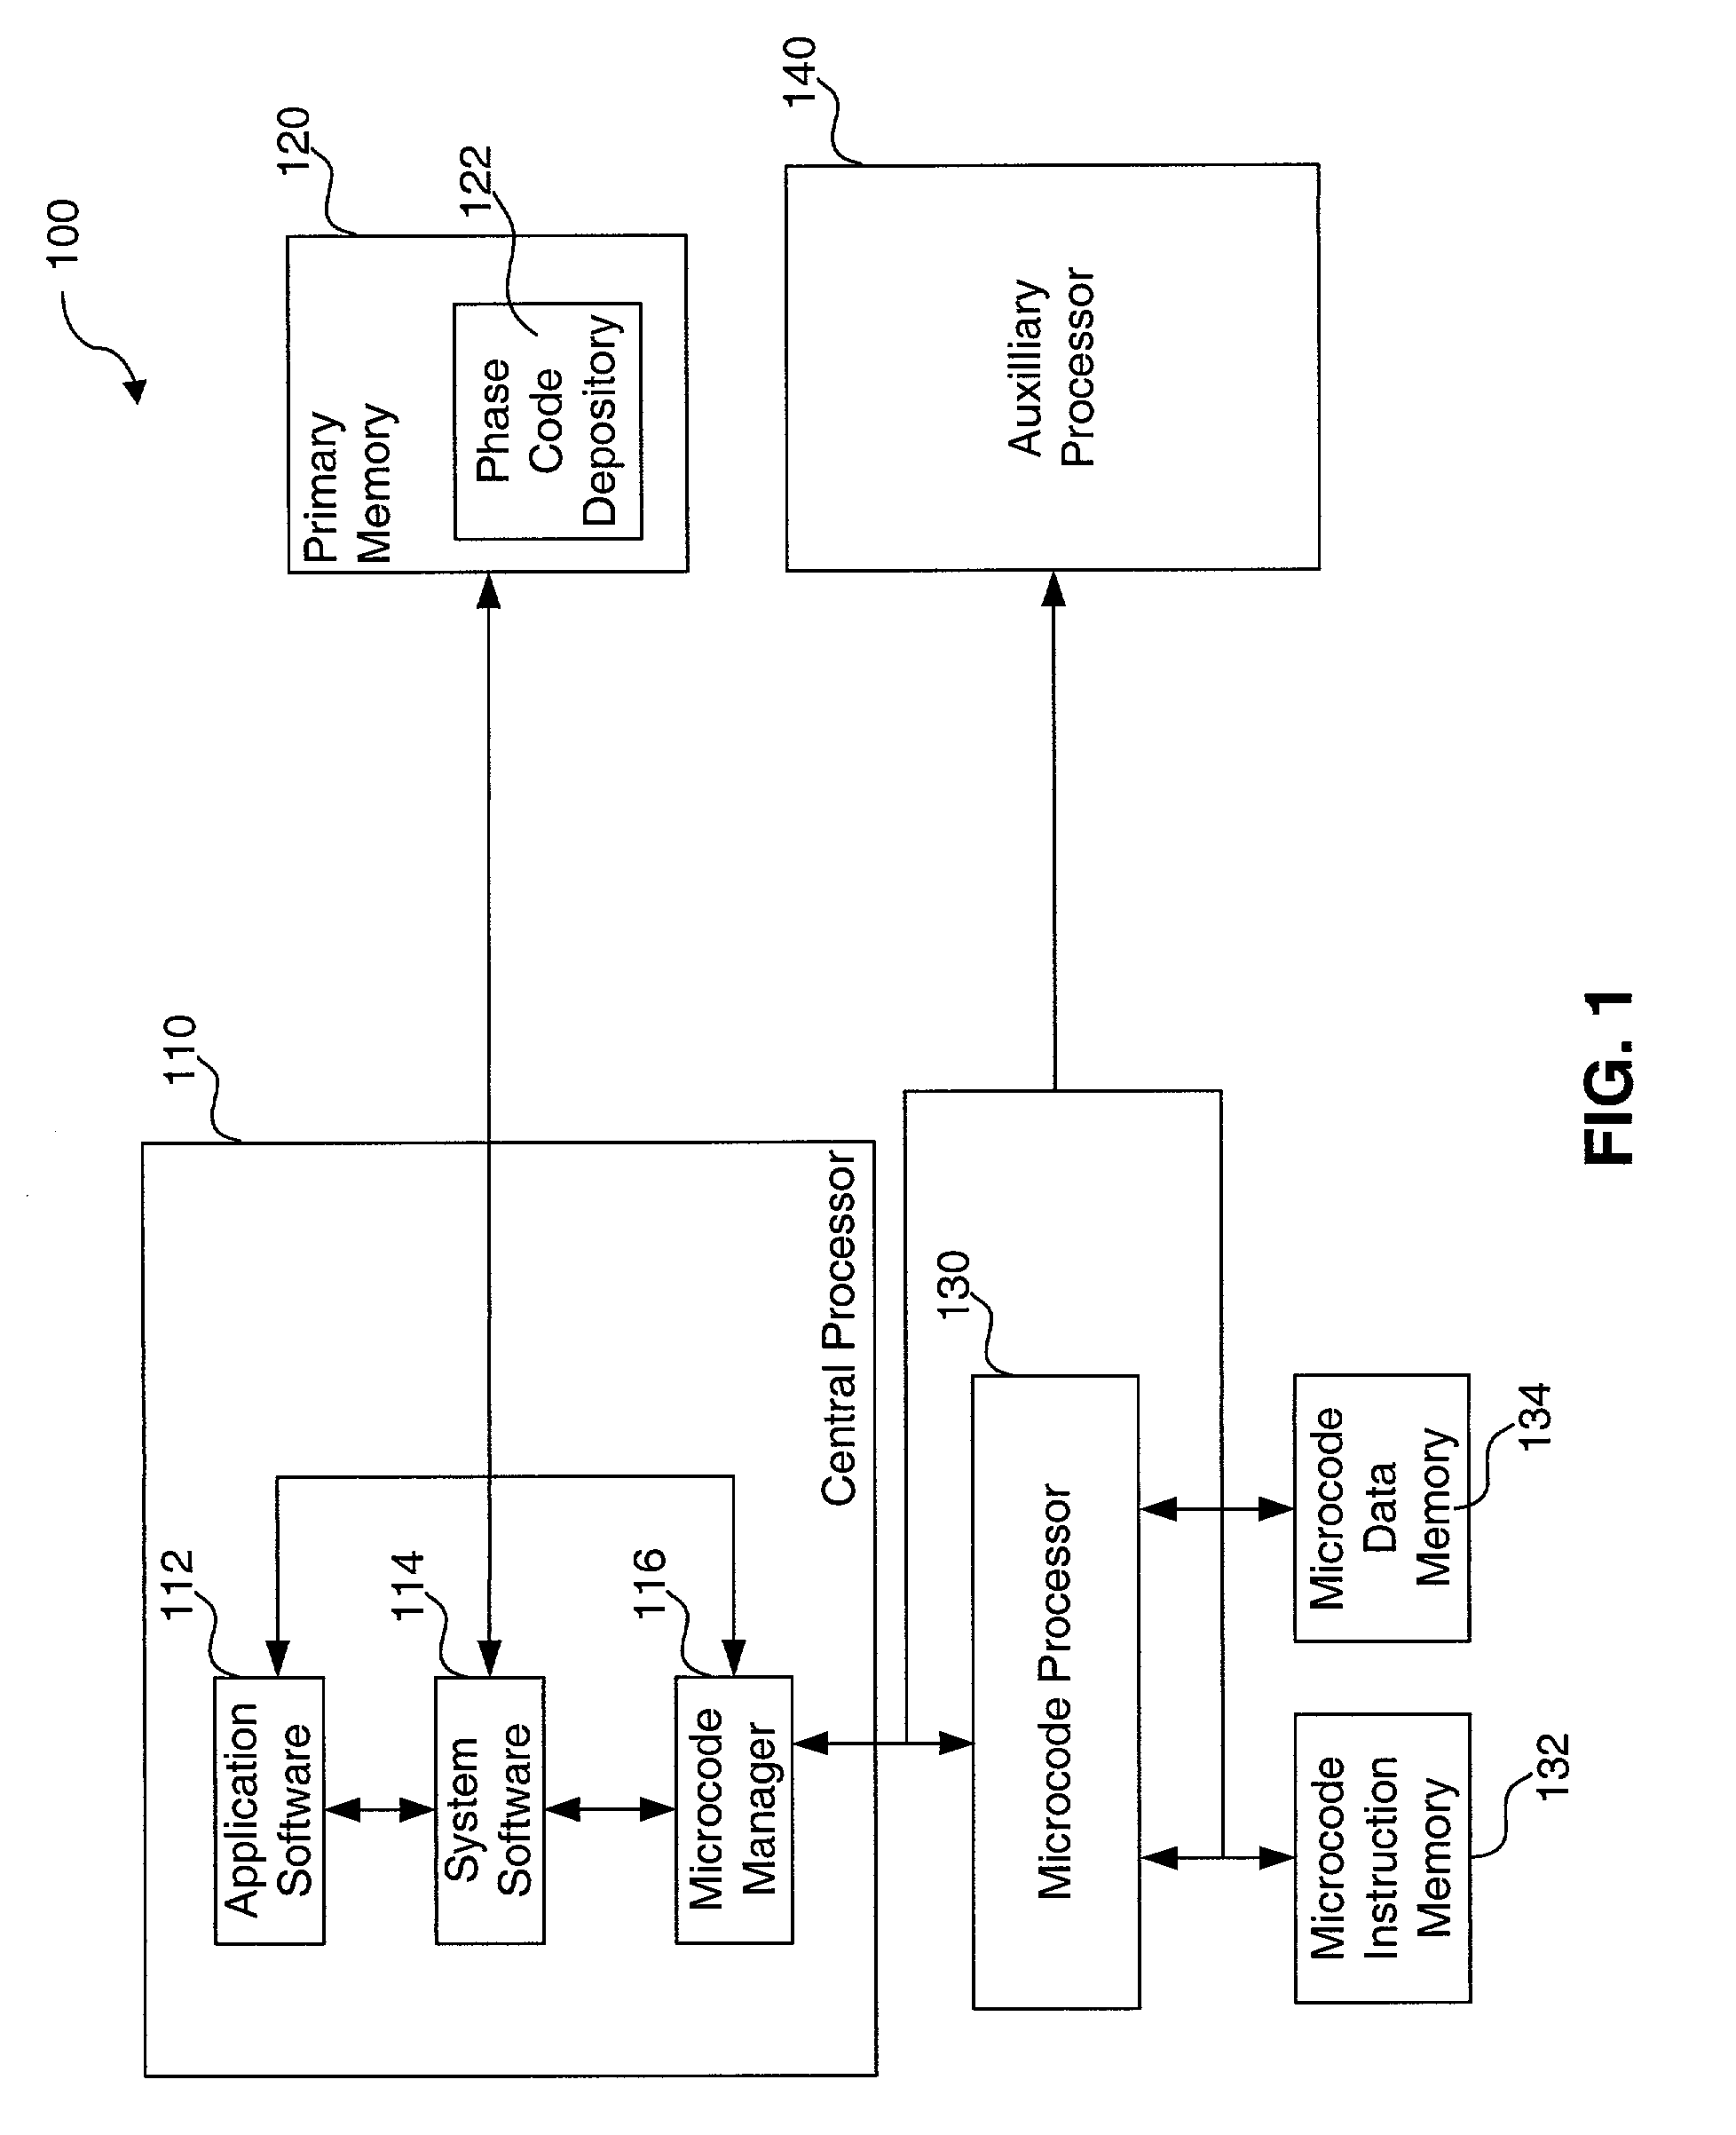 Method, system and computer program product for efficiently utilizing limited resources in a graphics device